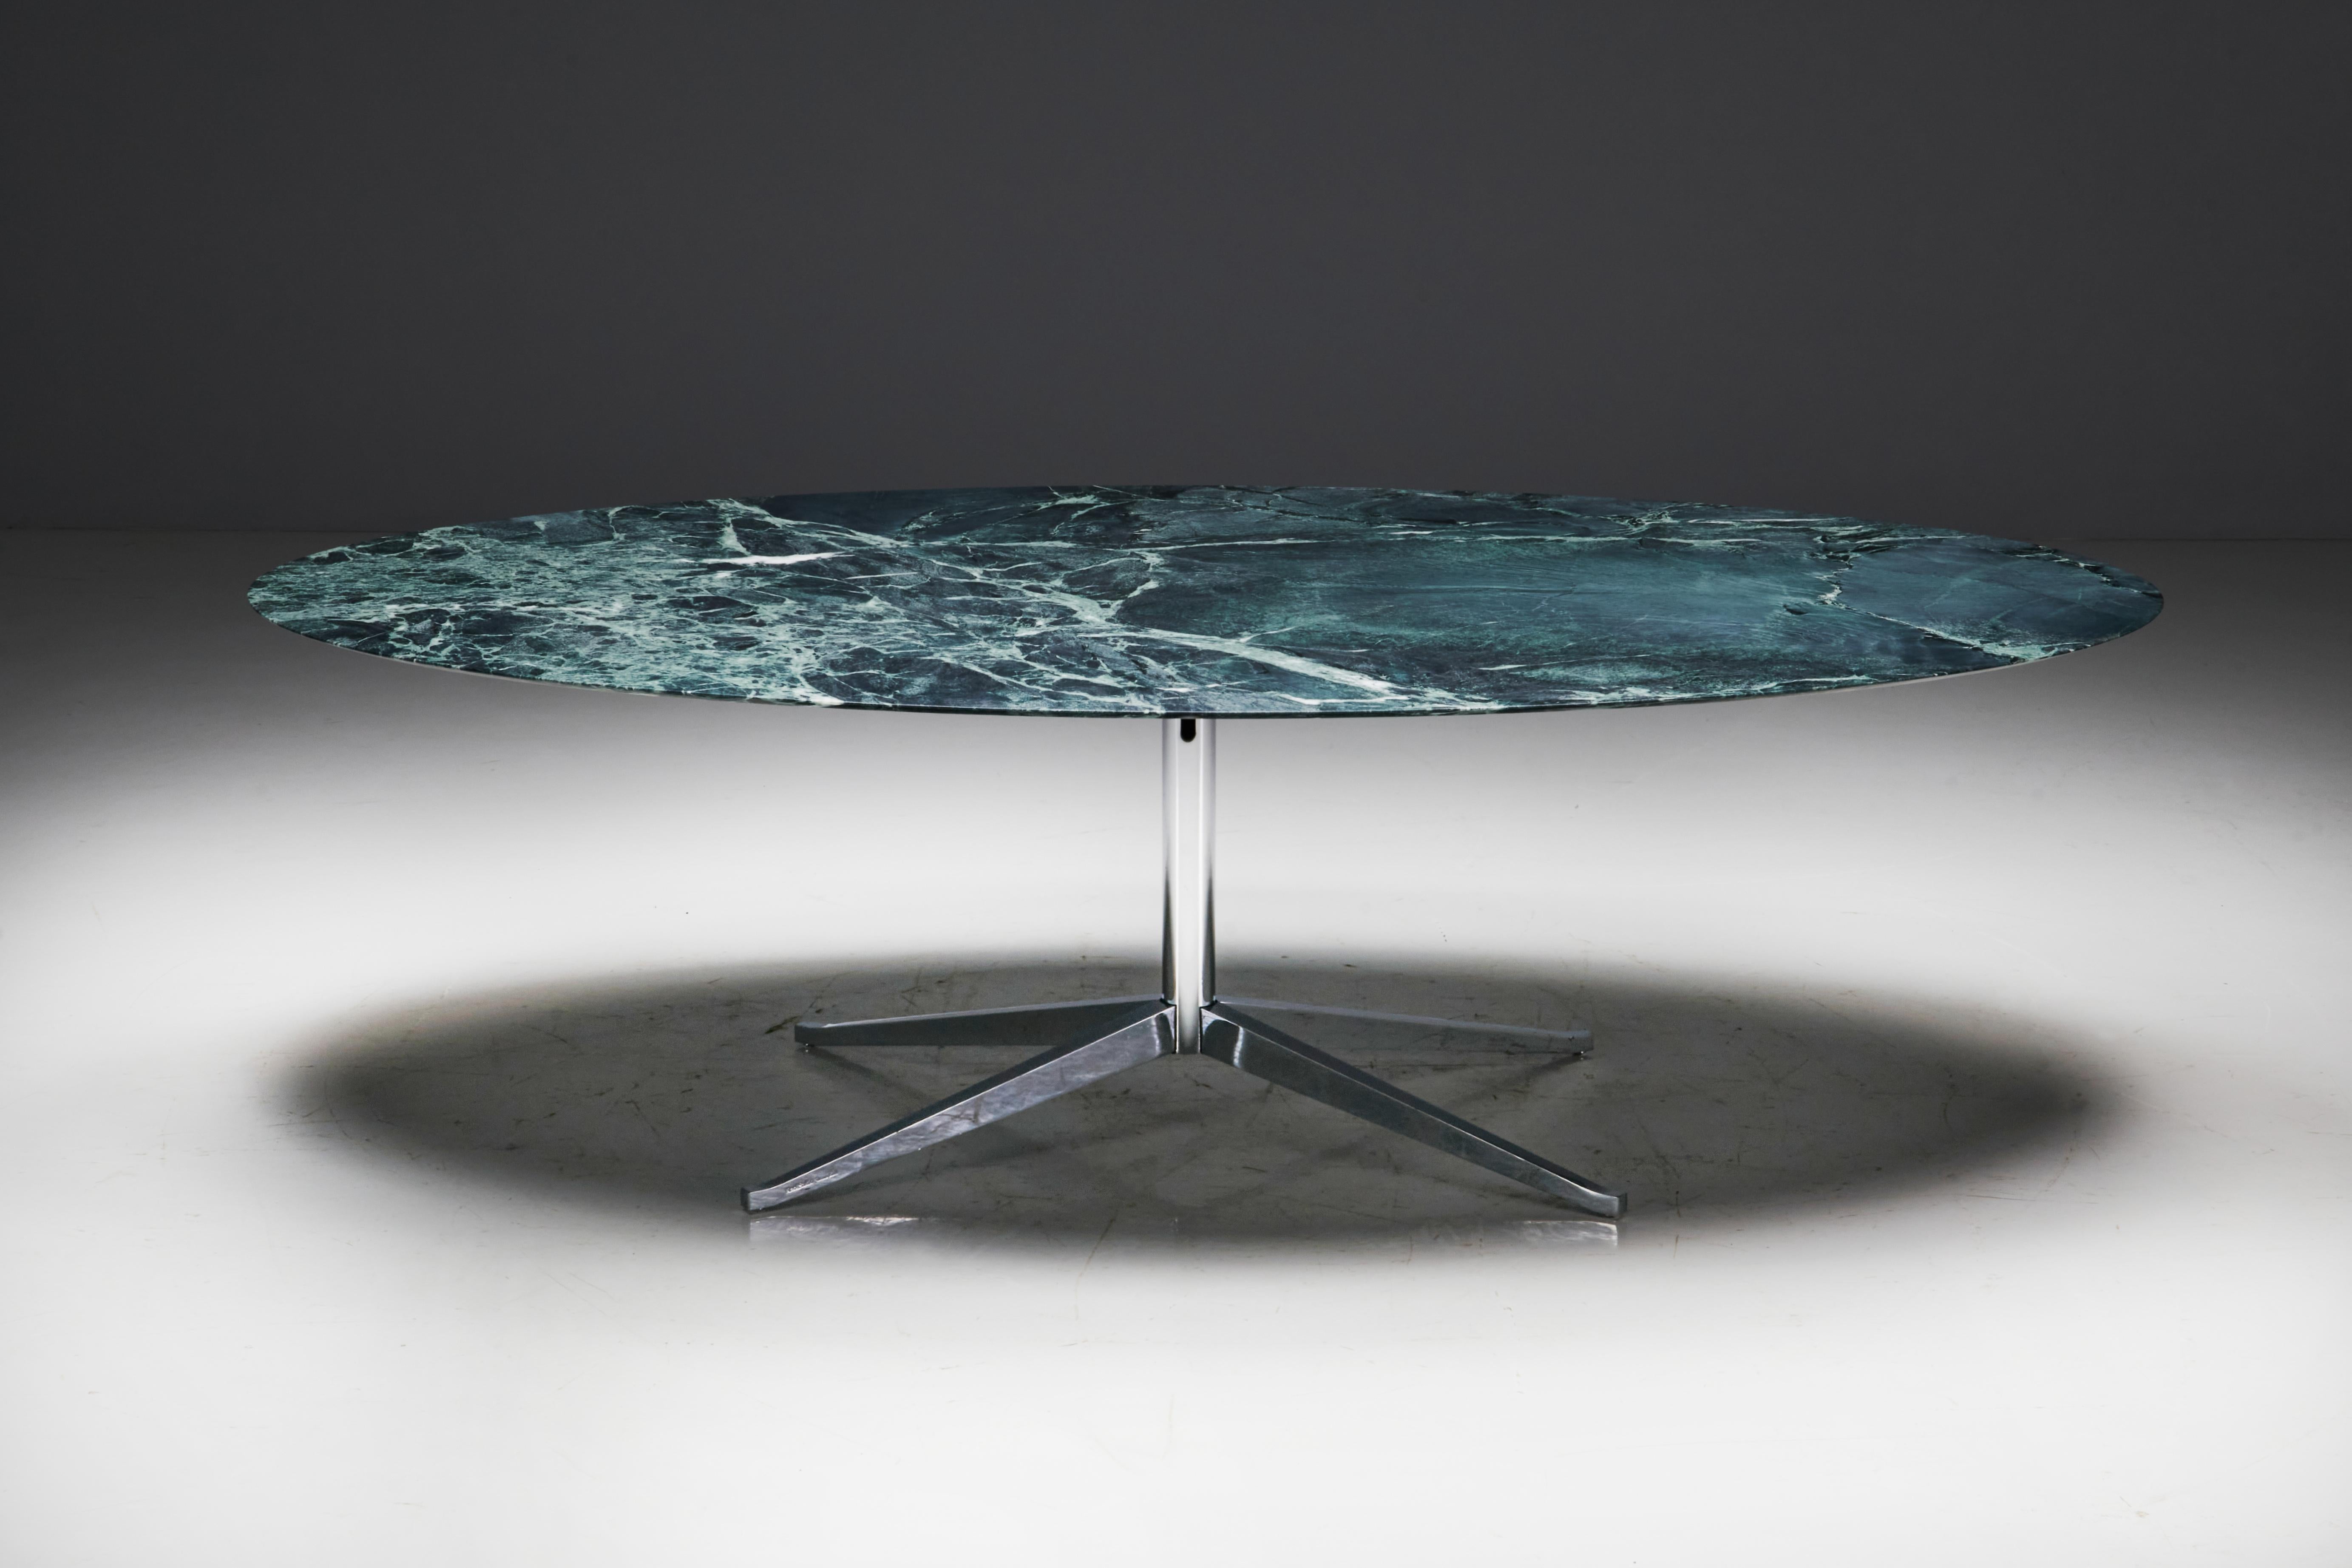 Manufactured in the United States during the 1960s, this oval dining table designed by Florence Knoll features a timeless design. The tabletop, carved from solid green marble, gracefully rests on a steel base supported by four splayed legs. The